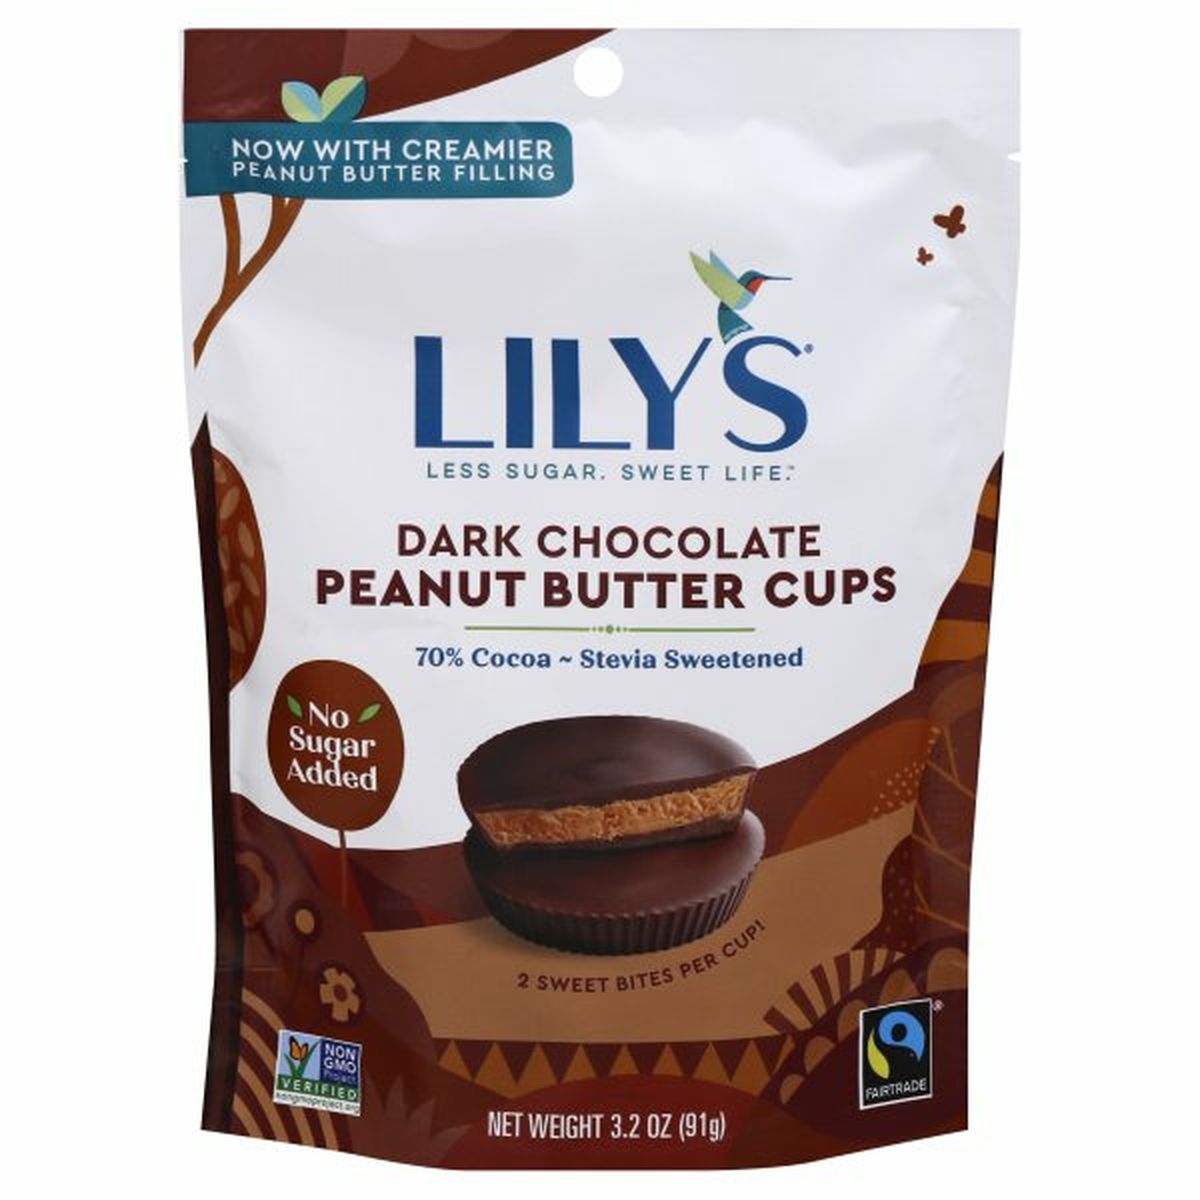 Calories in Lily's Peanut Butter Cups, Dark Chocolate, 70% Cocoa